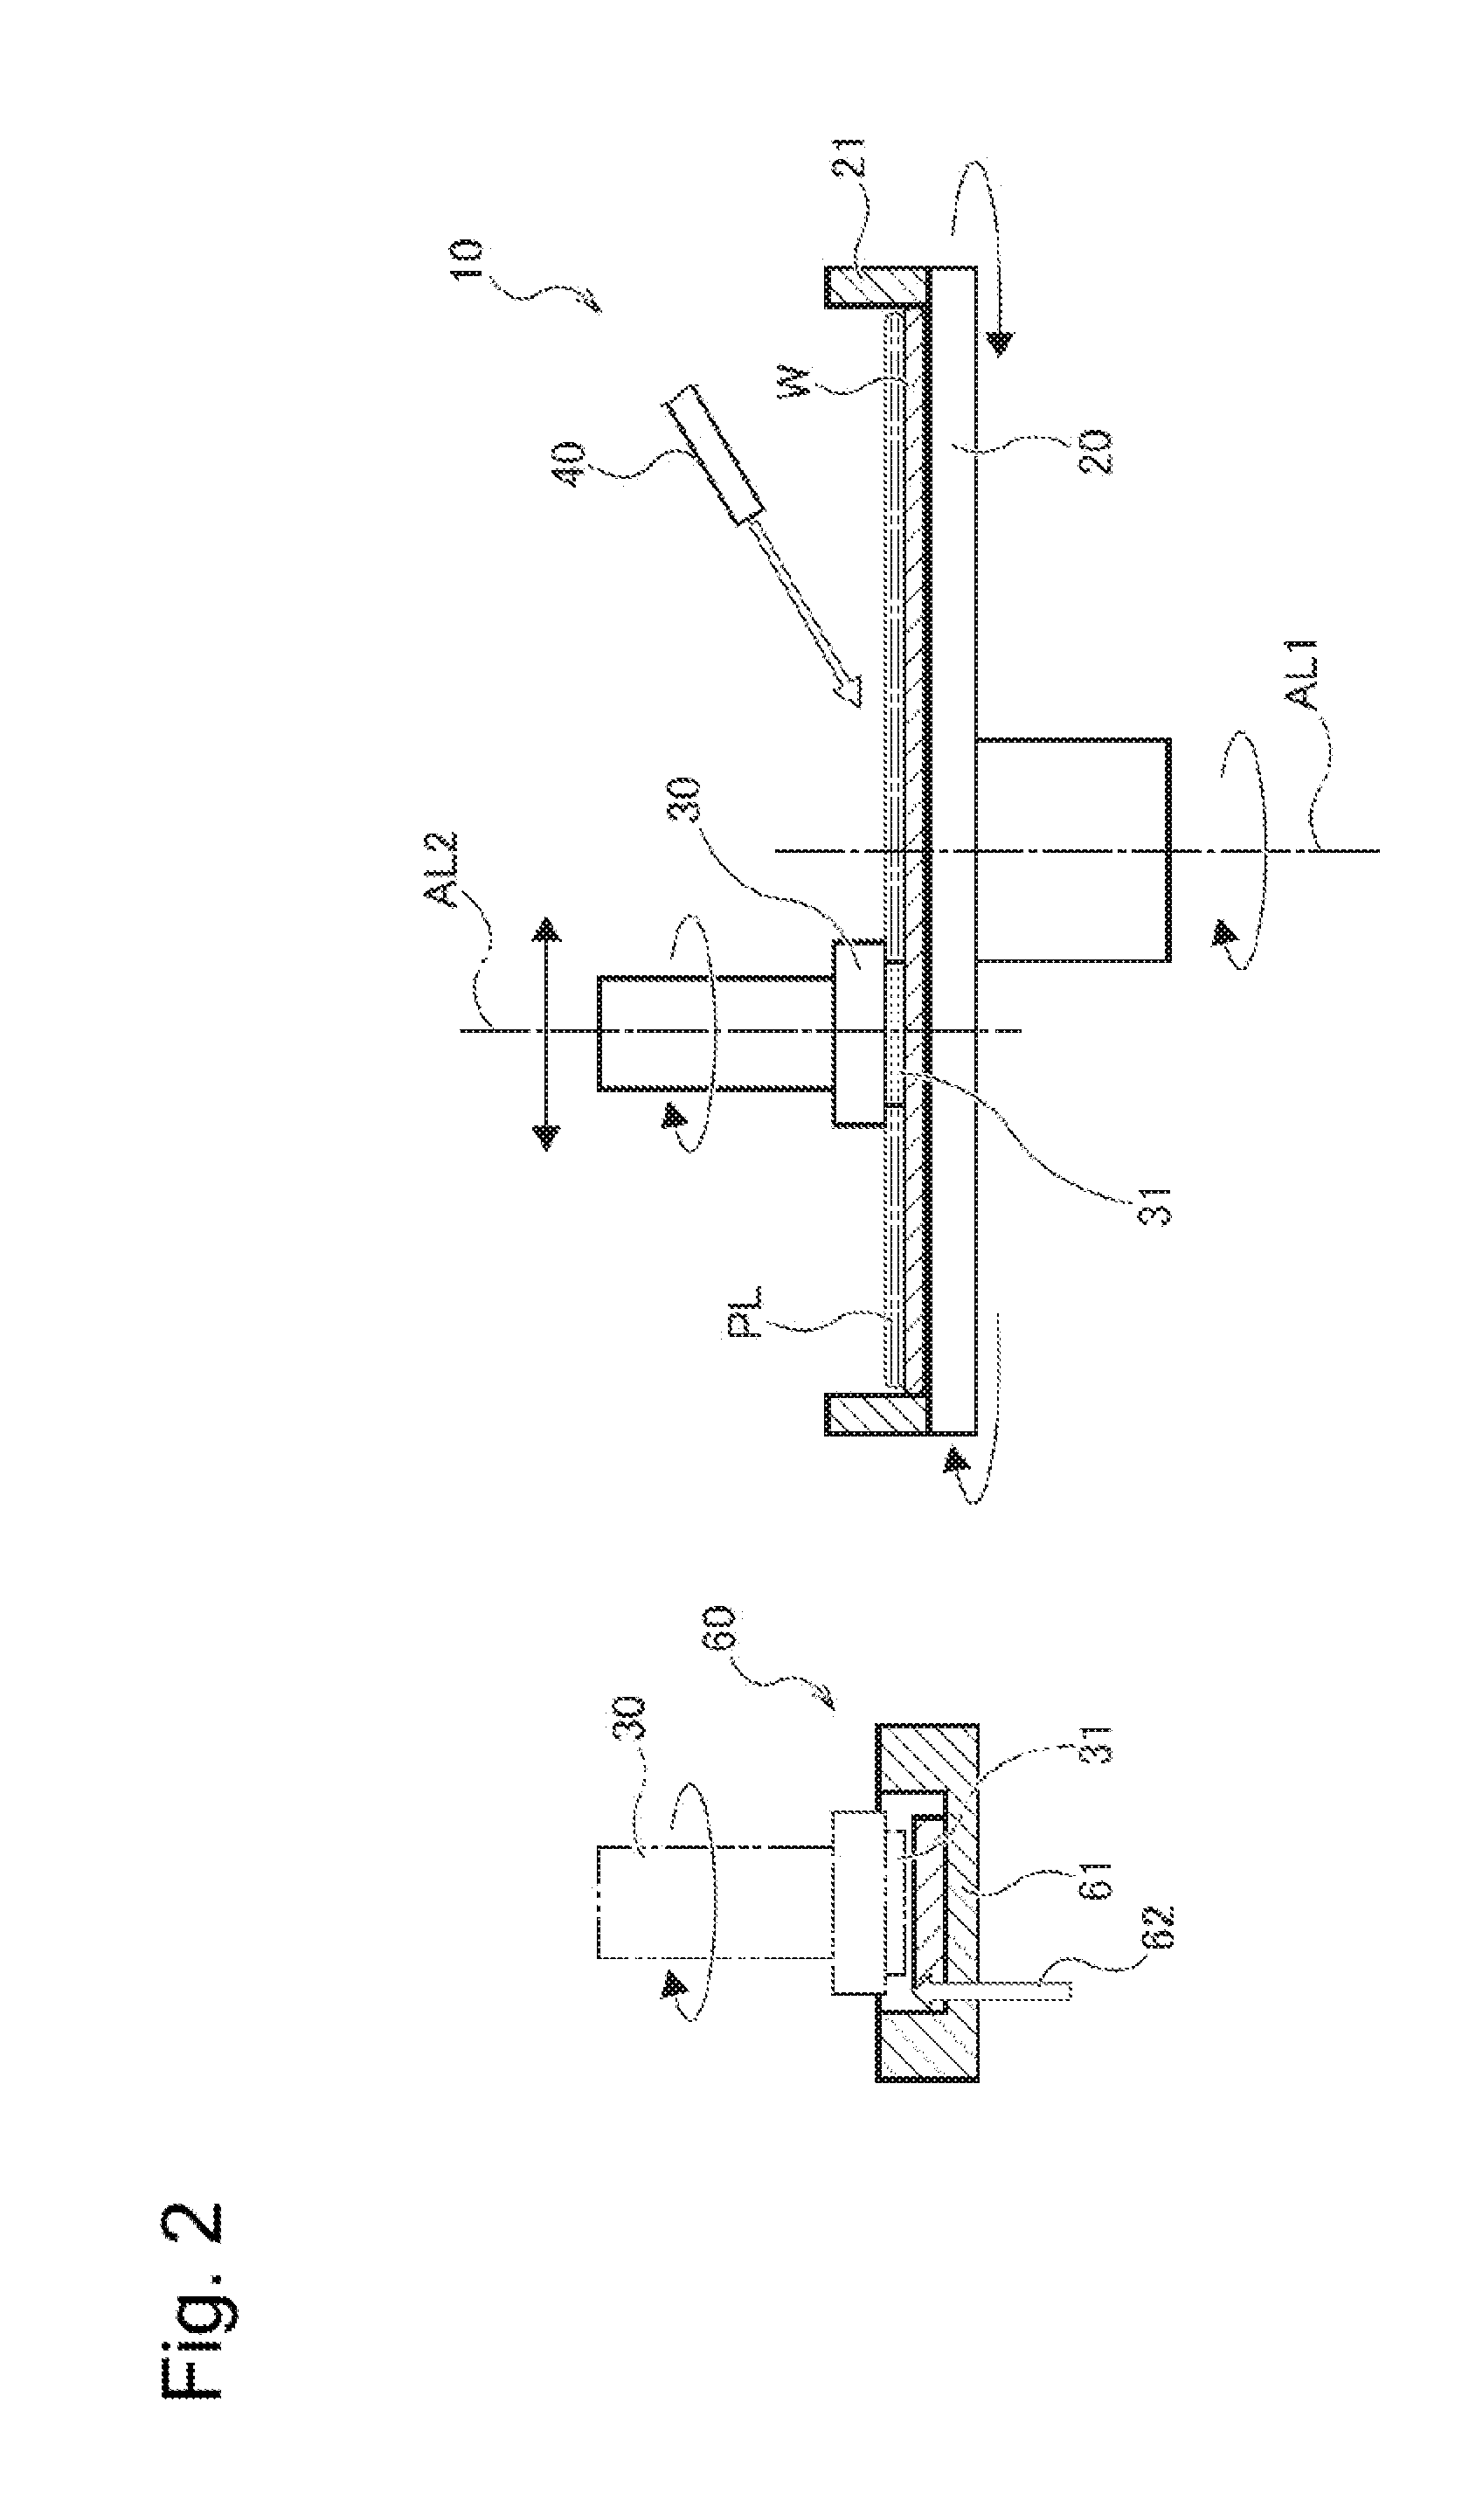 Substrate processing apparatus, substrate processing system. and substrate processing method